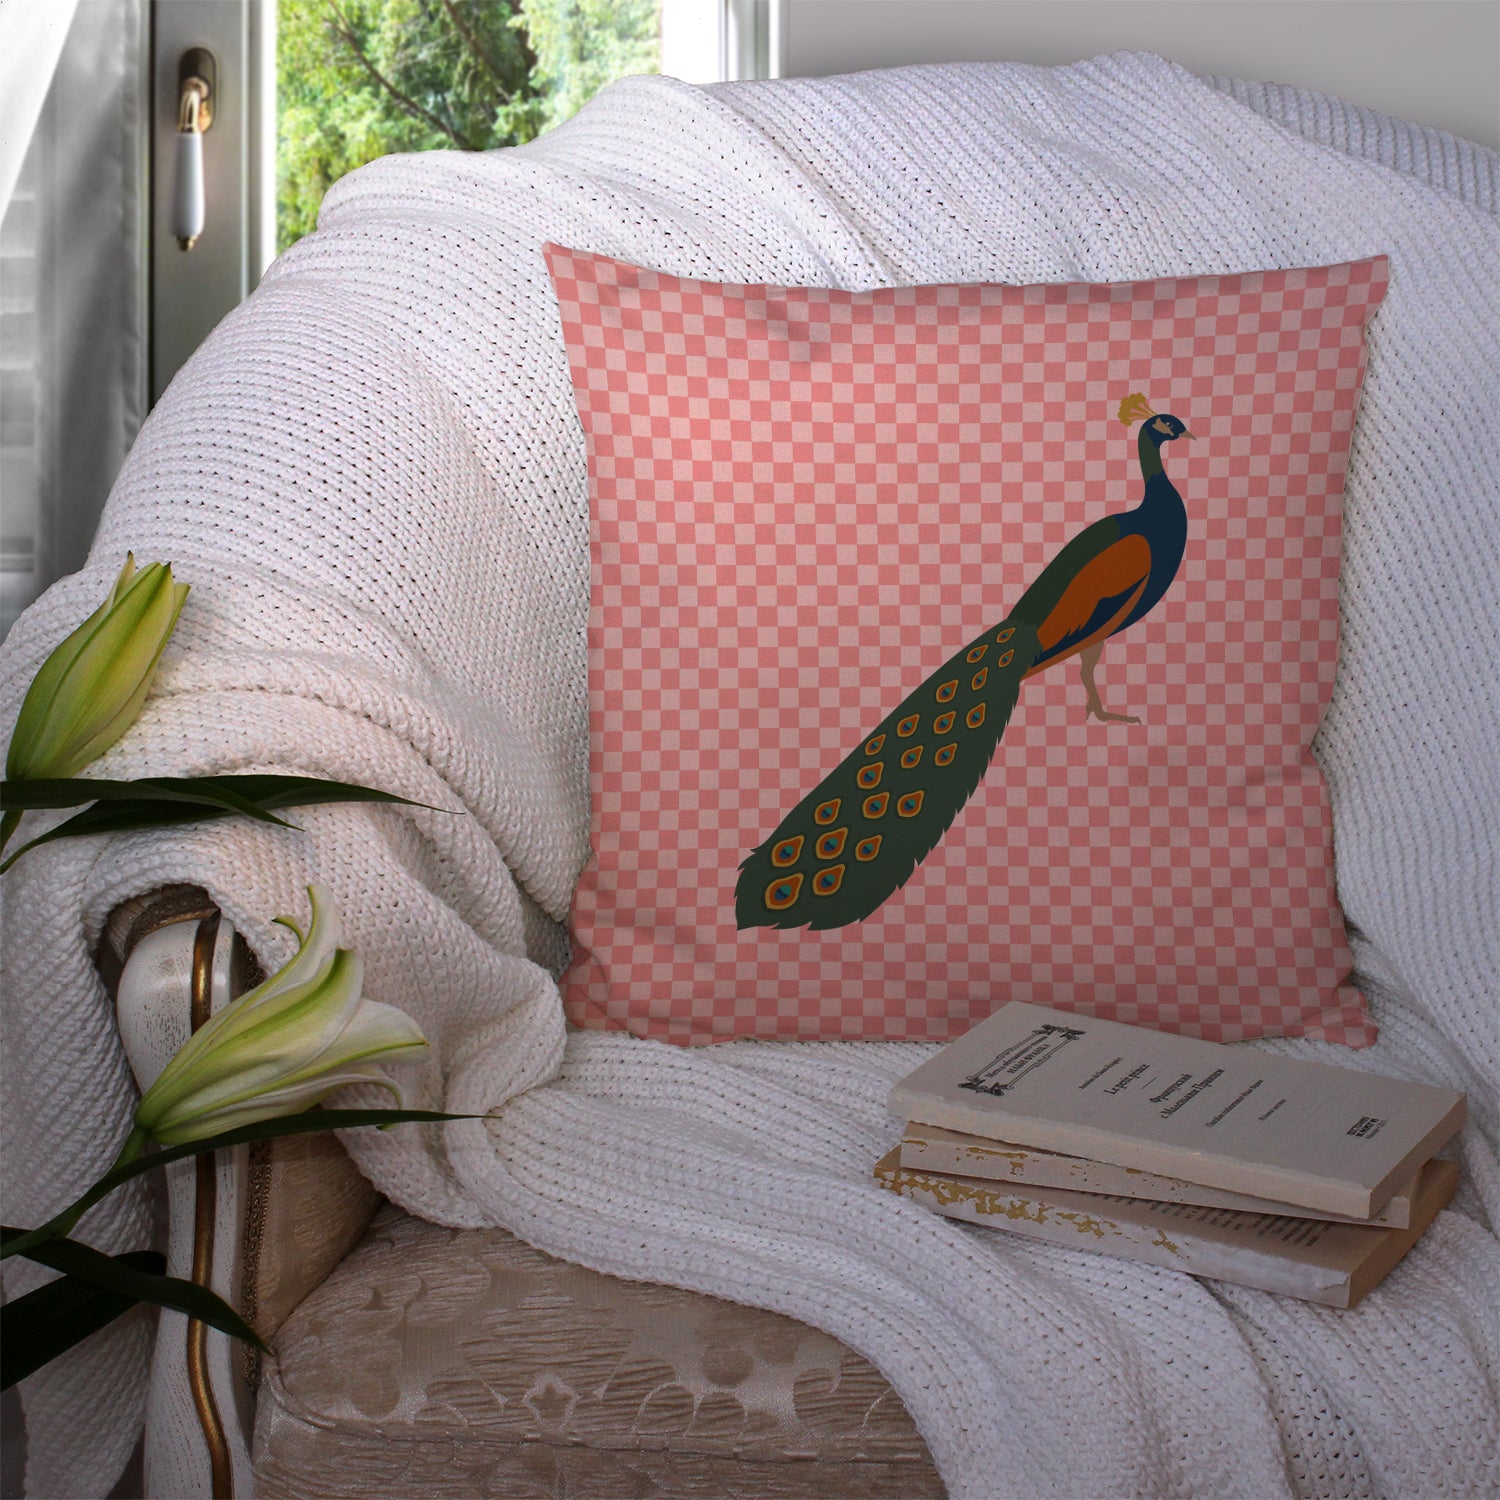 Indian Peacock Peafowl Pink Check Fabric Decorative Pillow BB7925PW1414 - the-store.com